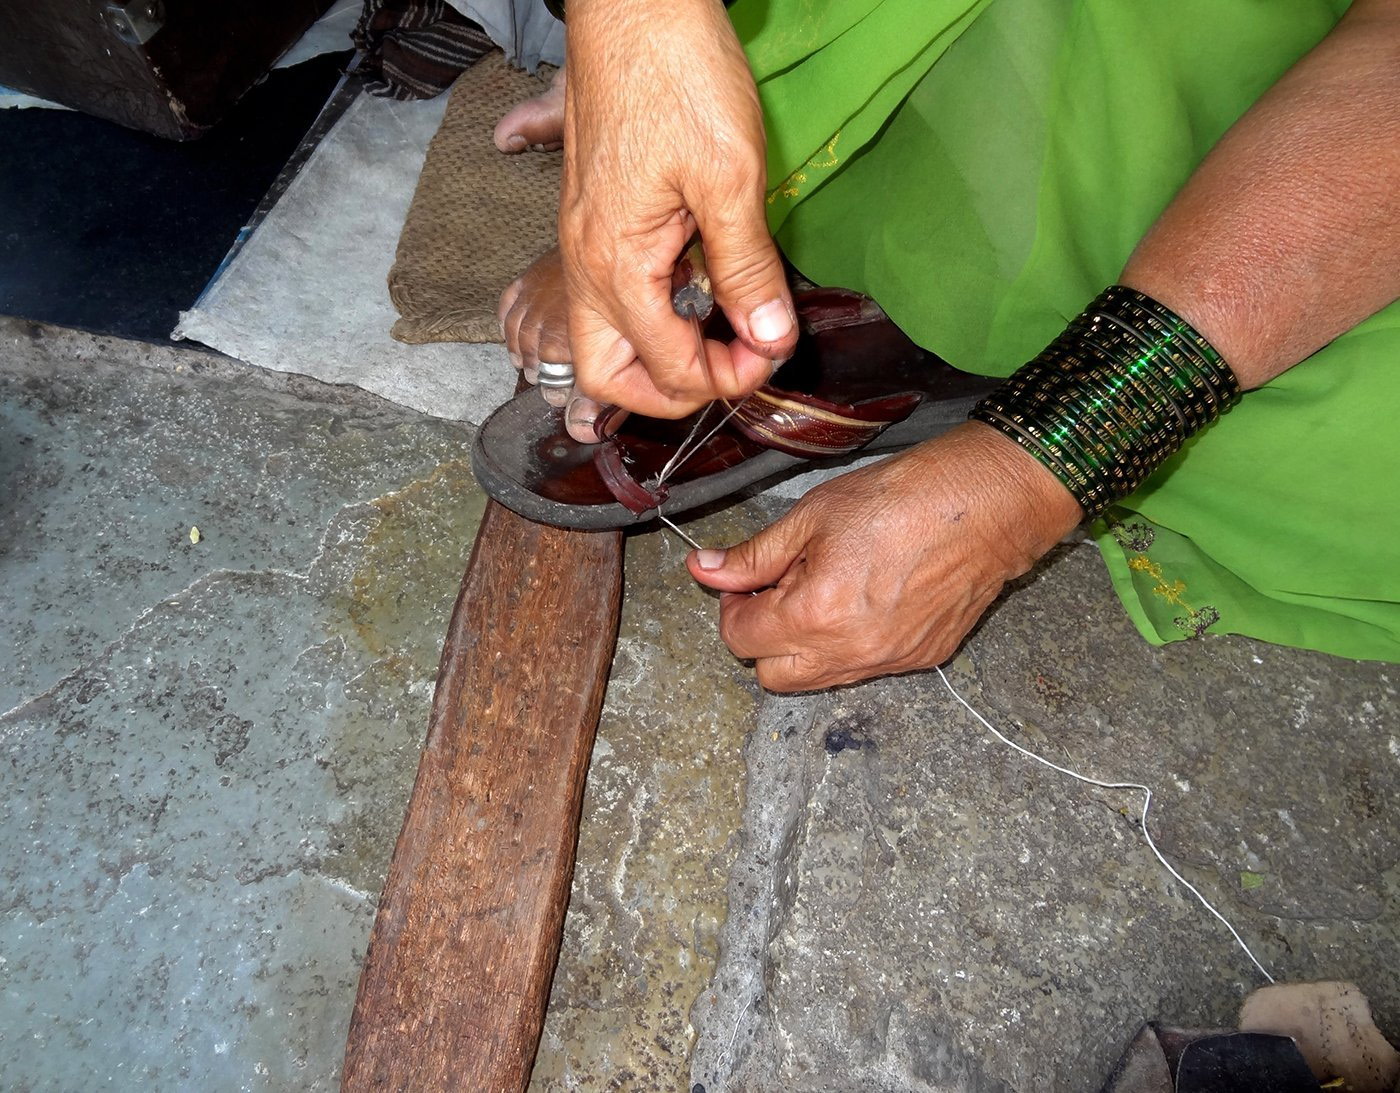 03-Bhamabai_Stitching_DSC01555-NW-Fixing Straps and Mending Soles.jpg